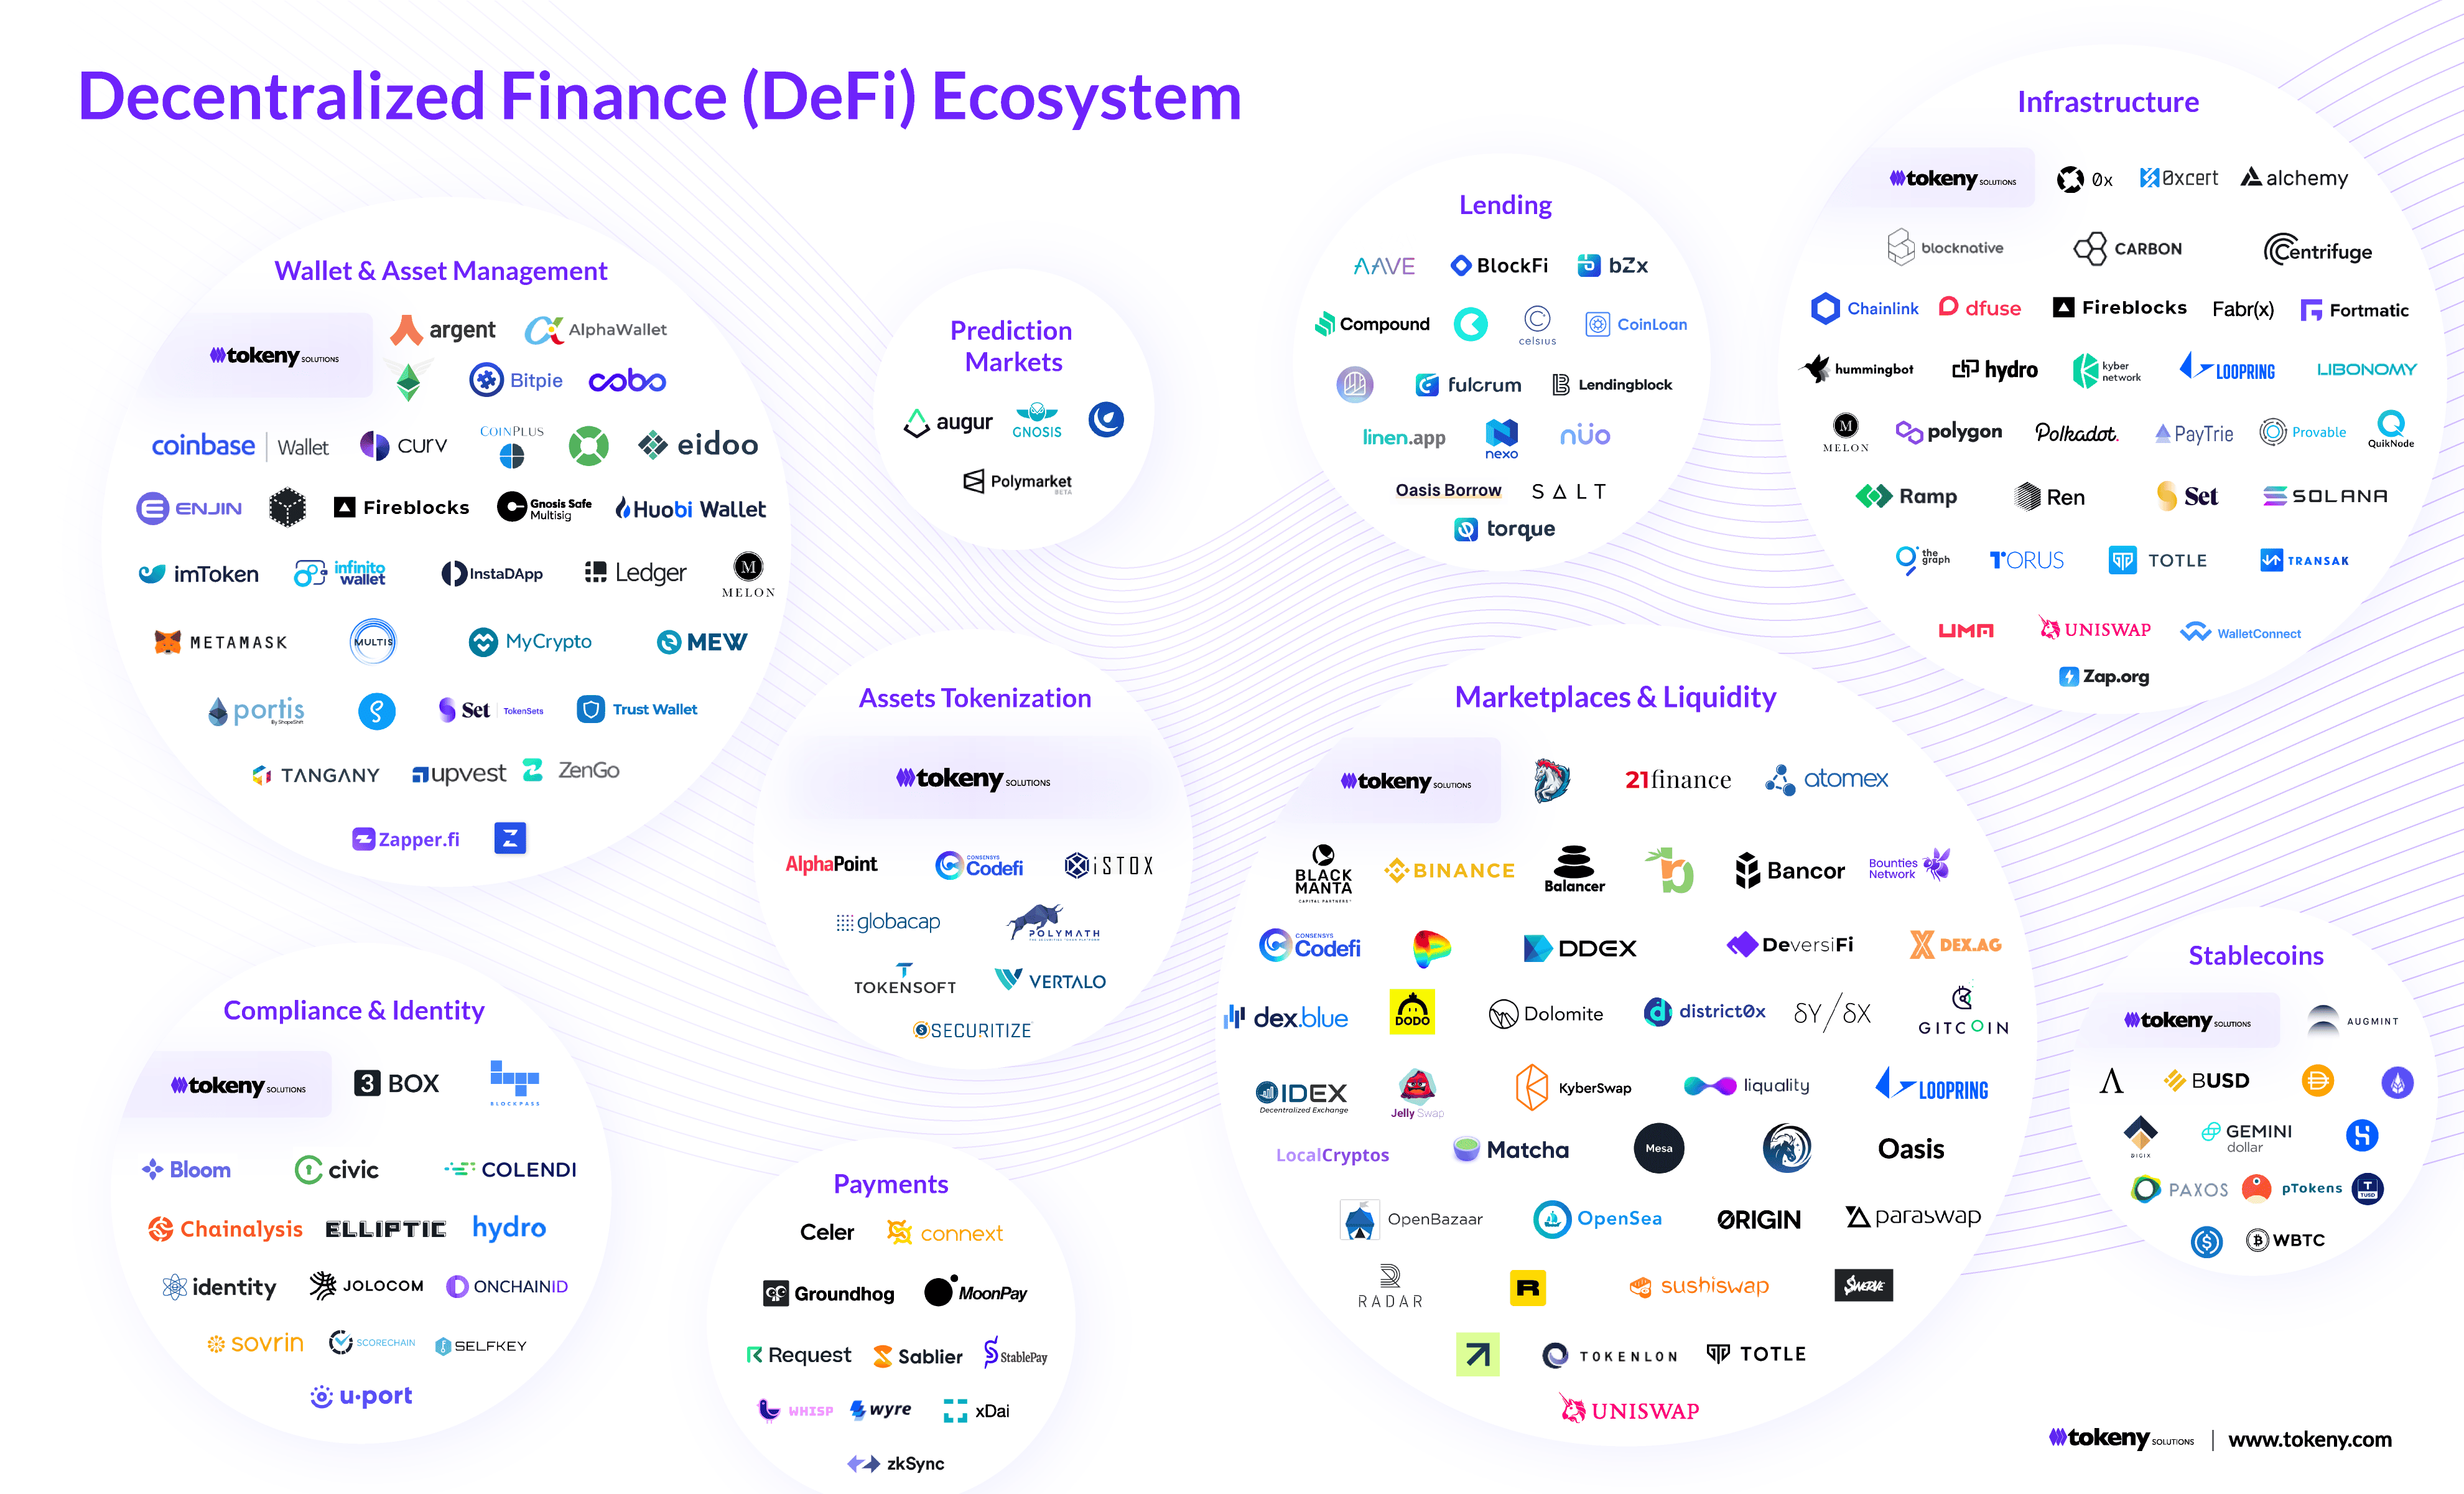 An image showcasing the key characteristics of DeFi Blue Chips, the most reliable and established projects in the decentralized finance ecosystem.